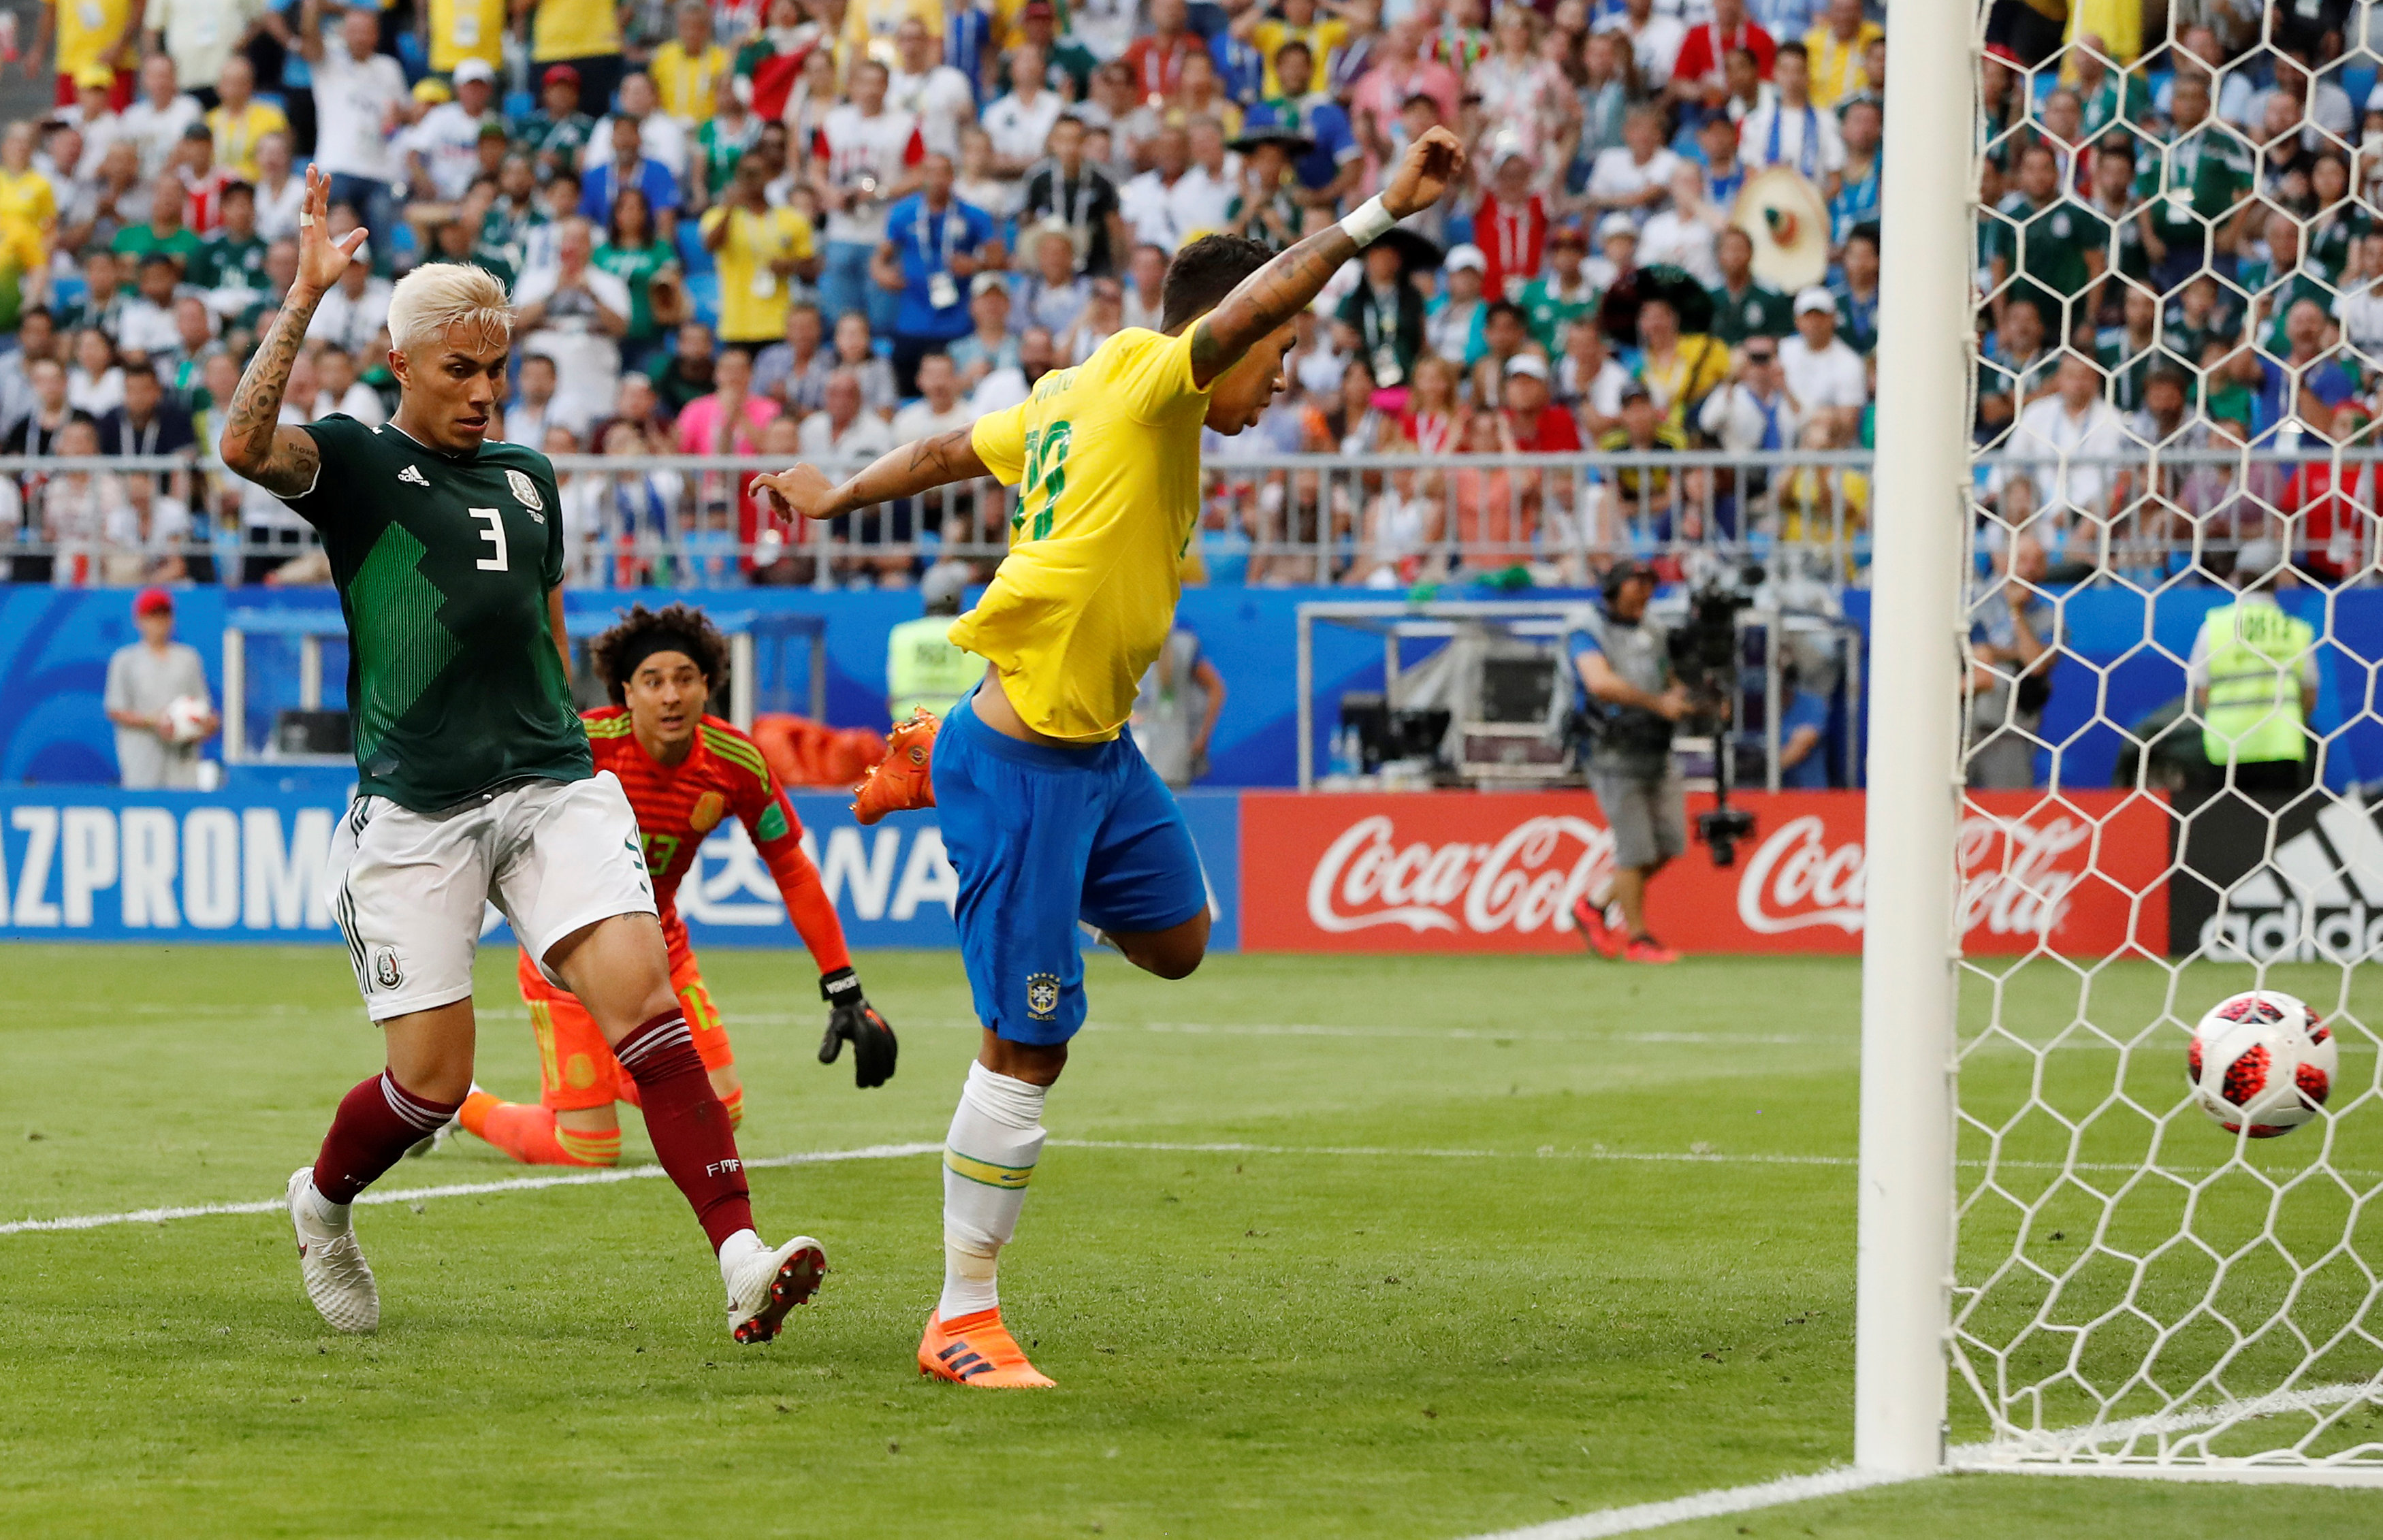 Neymar shines as Brazil beat Mexico to reach World Cup quarters